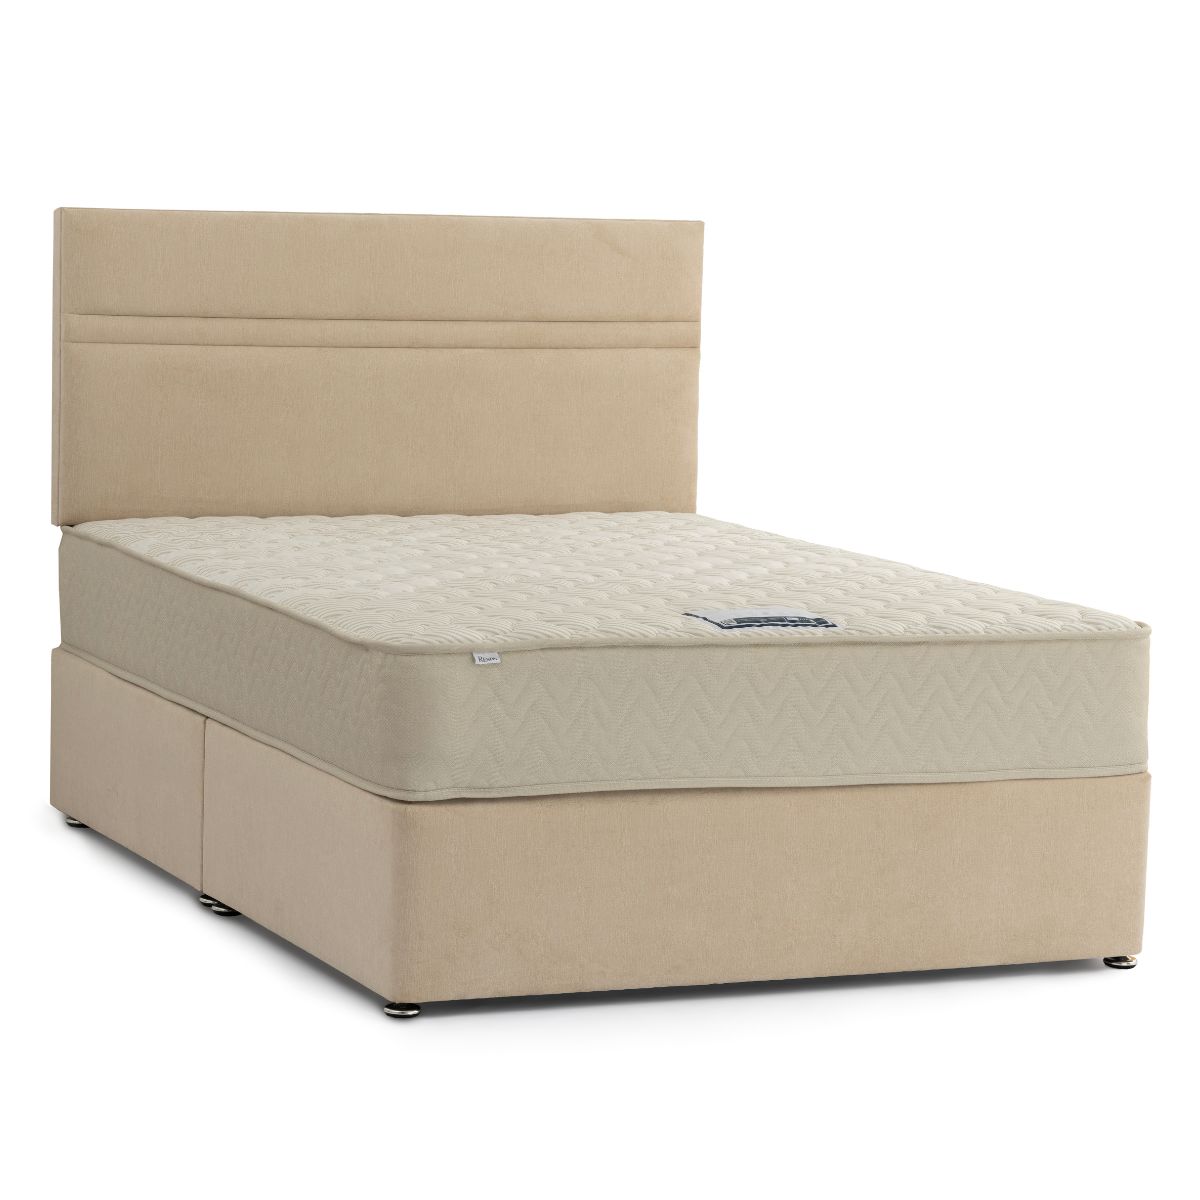 Formation Orthopaedic Mattress by Respa - 1